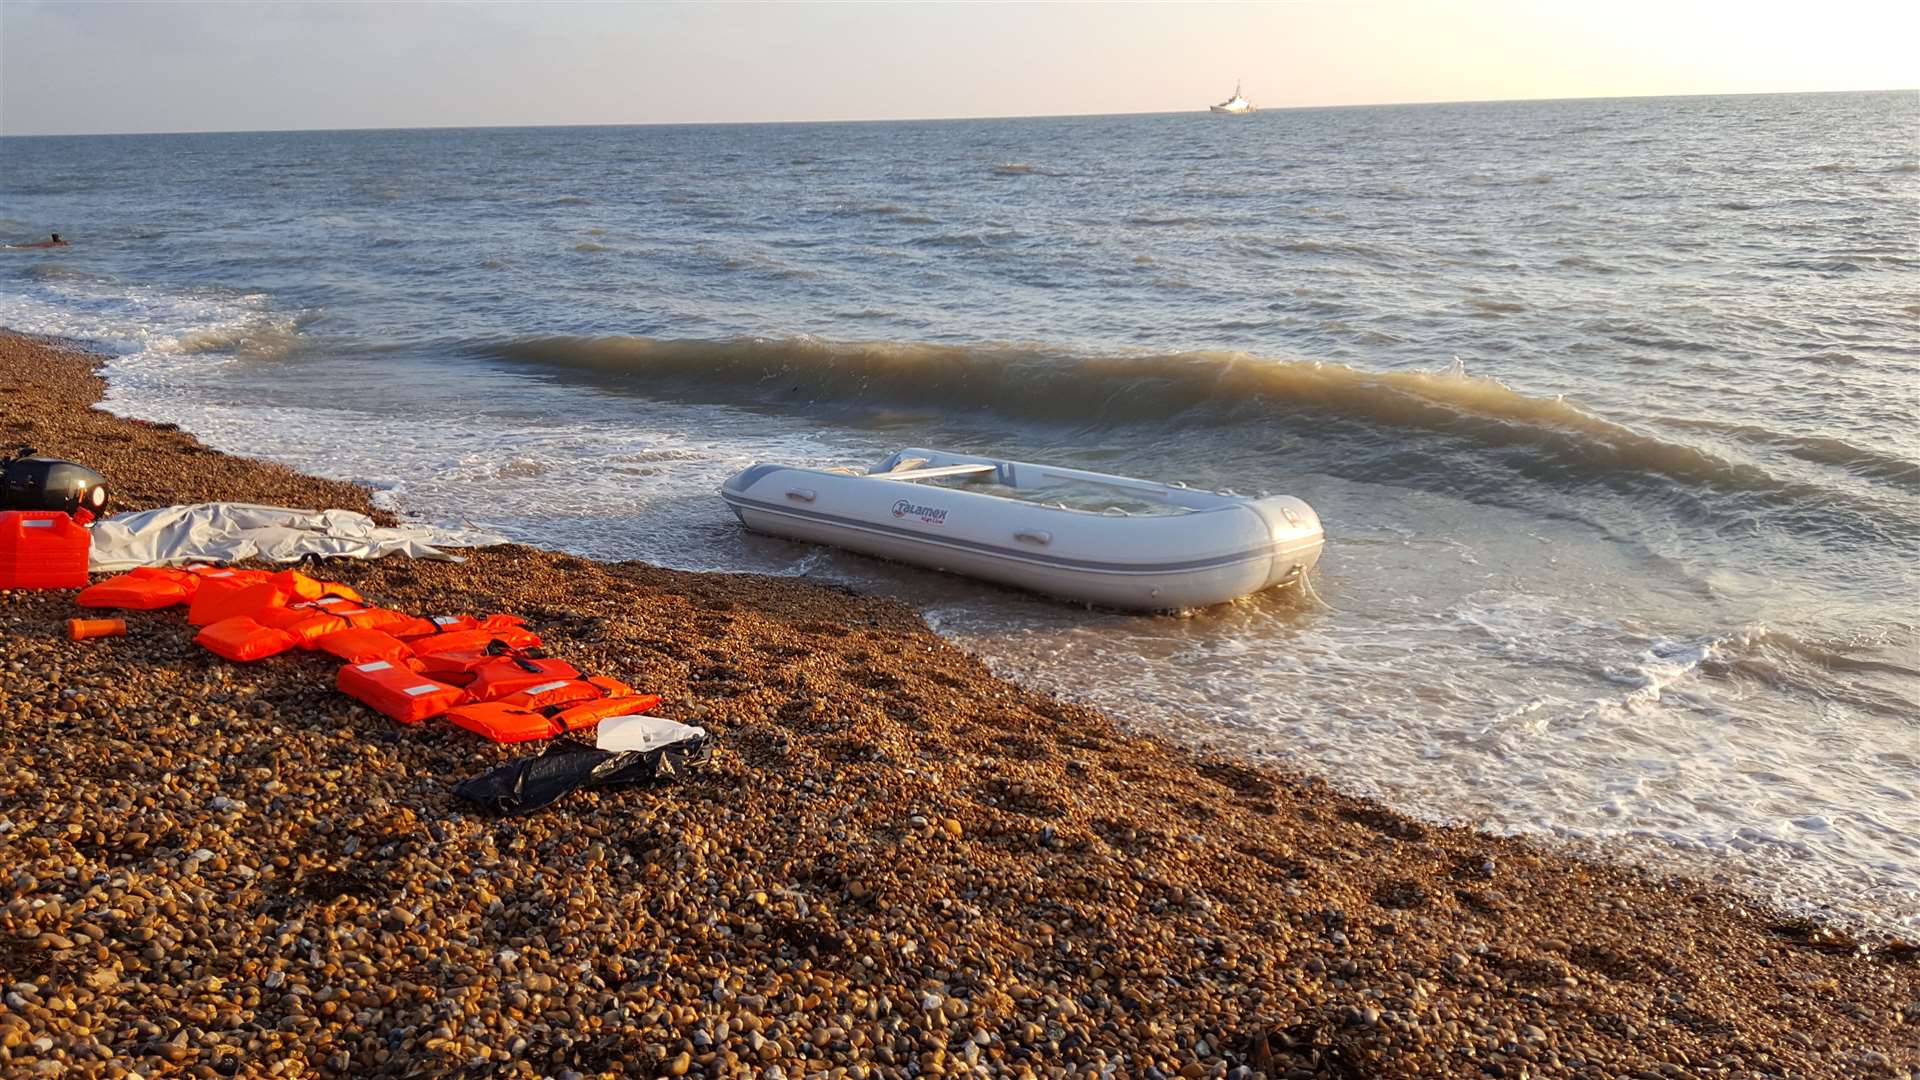 A dinghy and lifejackets found abandoned on the beach at Kingsdown in January 2019